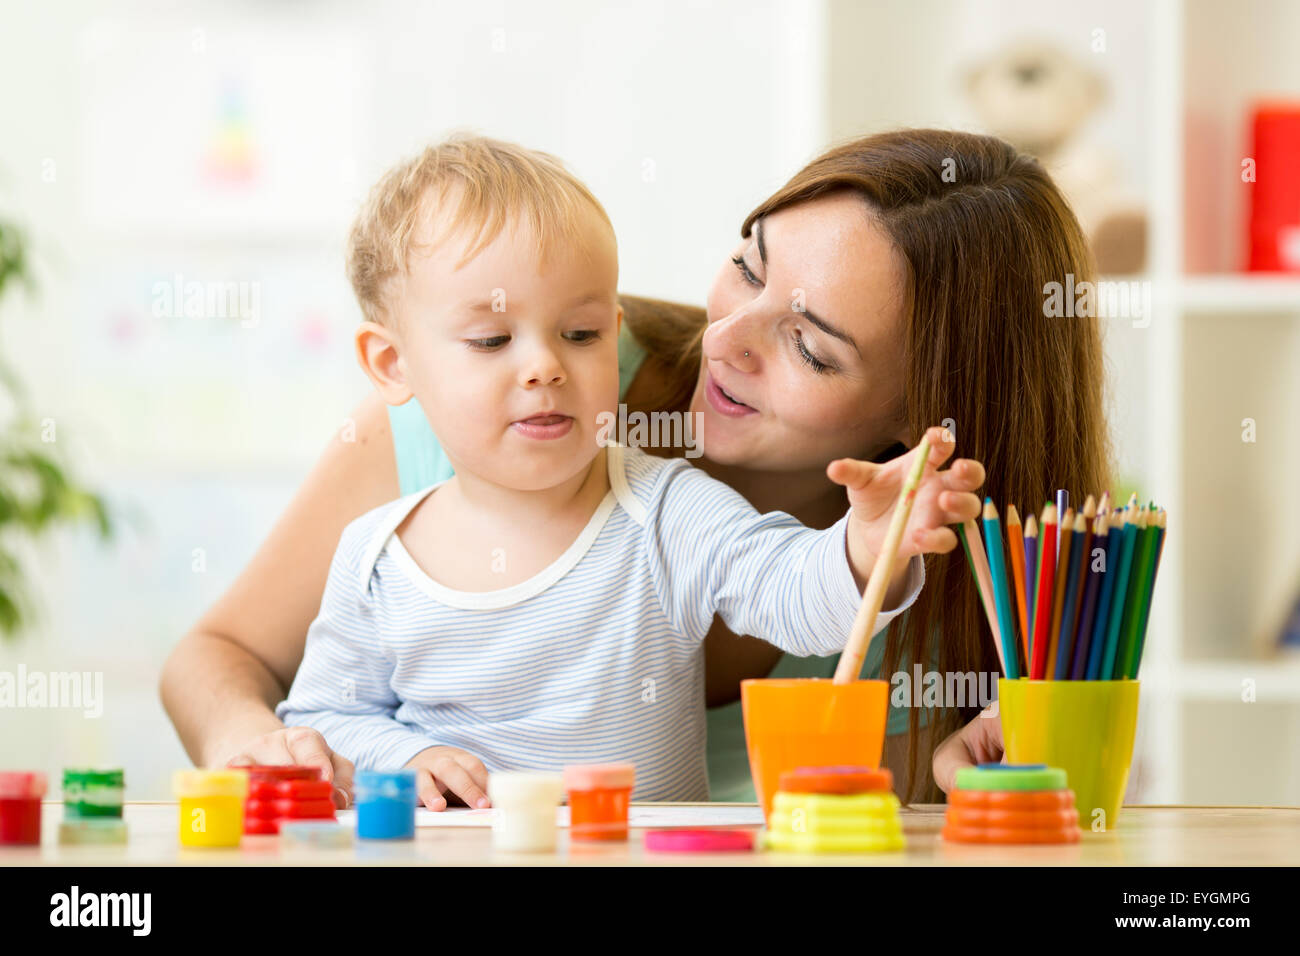 kid painting at home or day care center Stock Photo